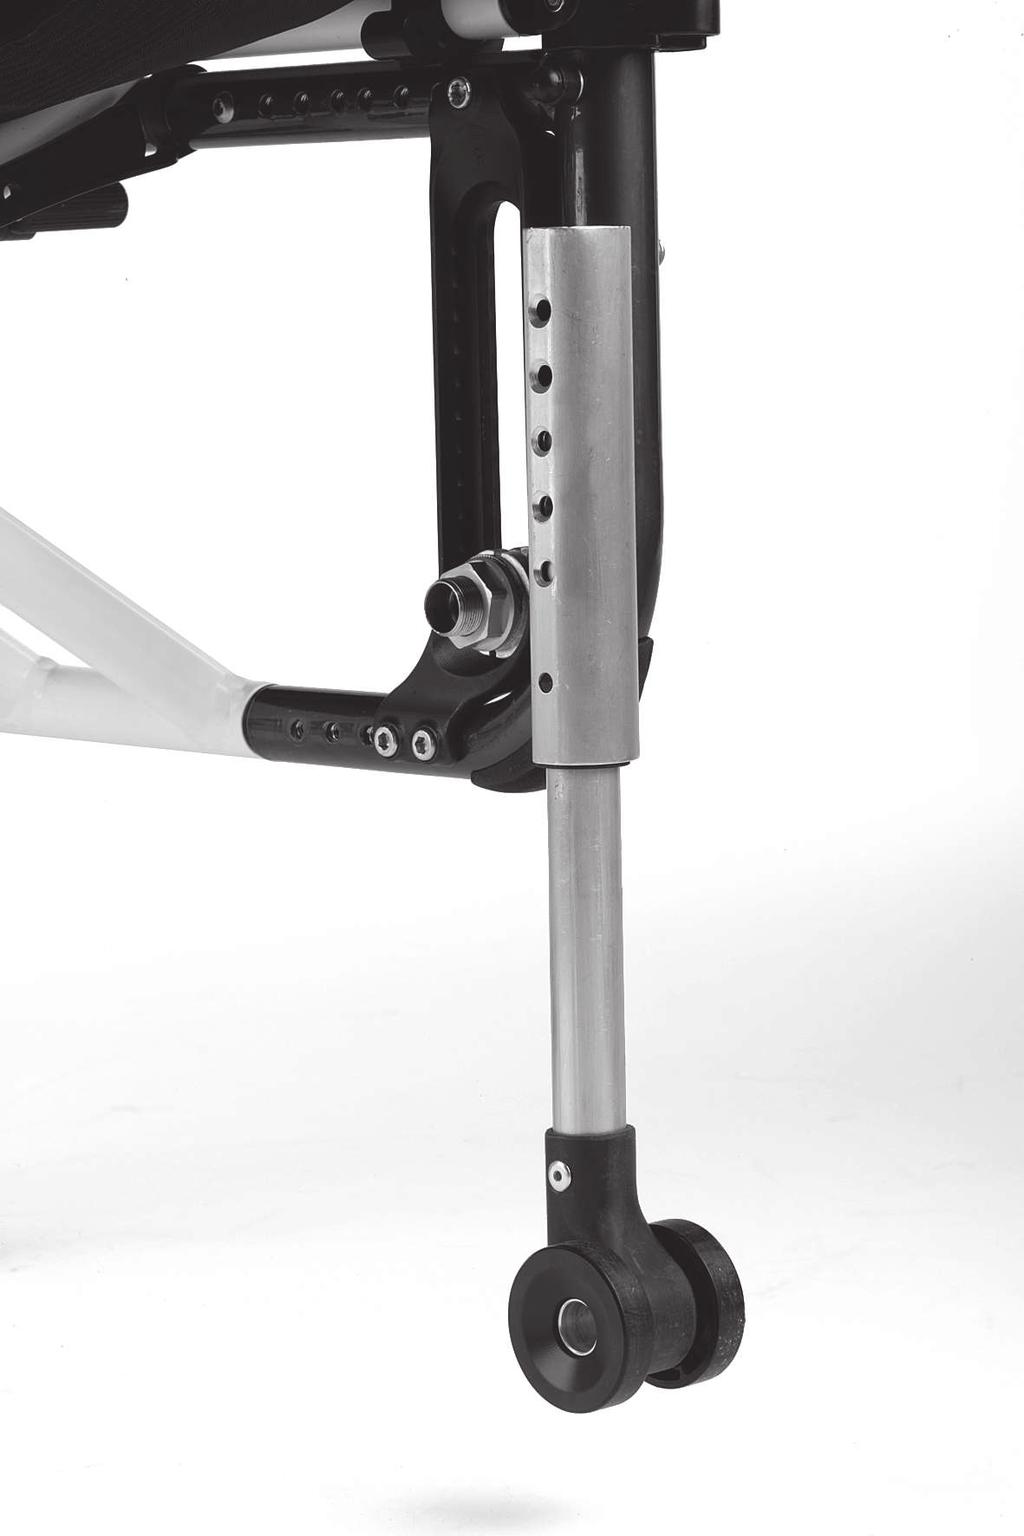 2) Insert the transport wheel true to side into the vertical accessory mount.